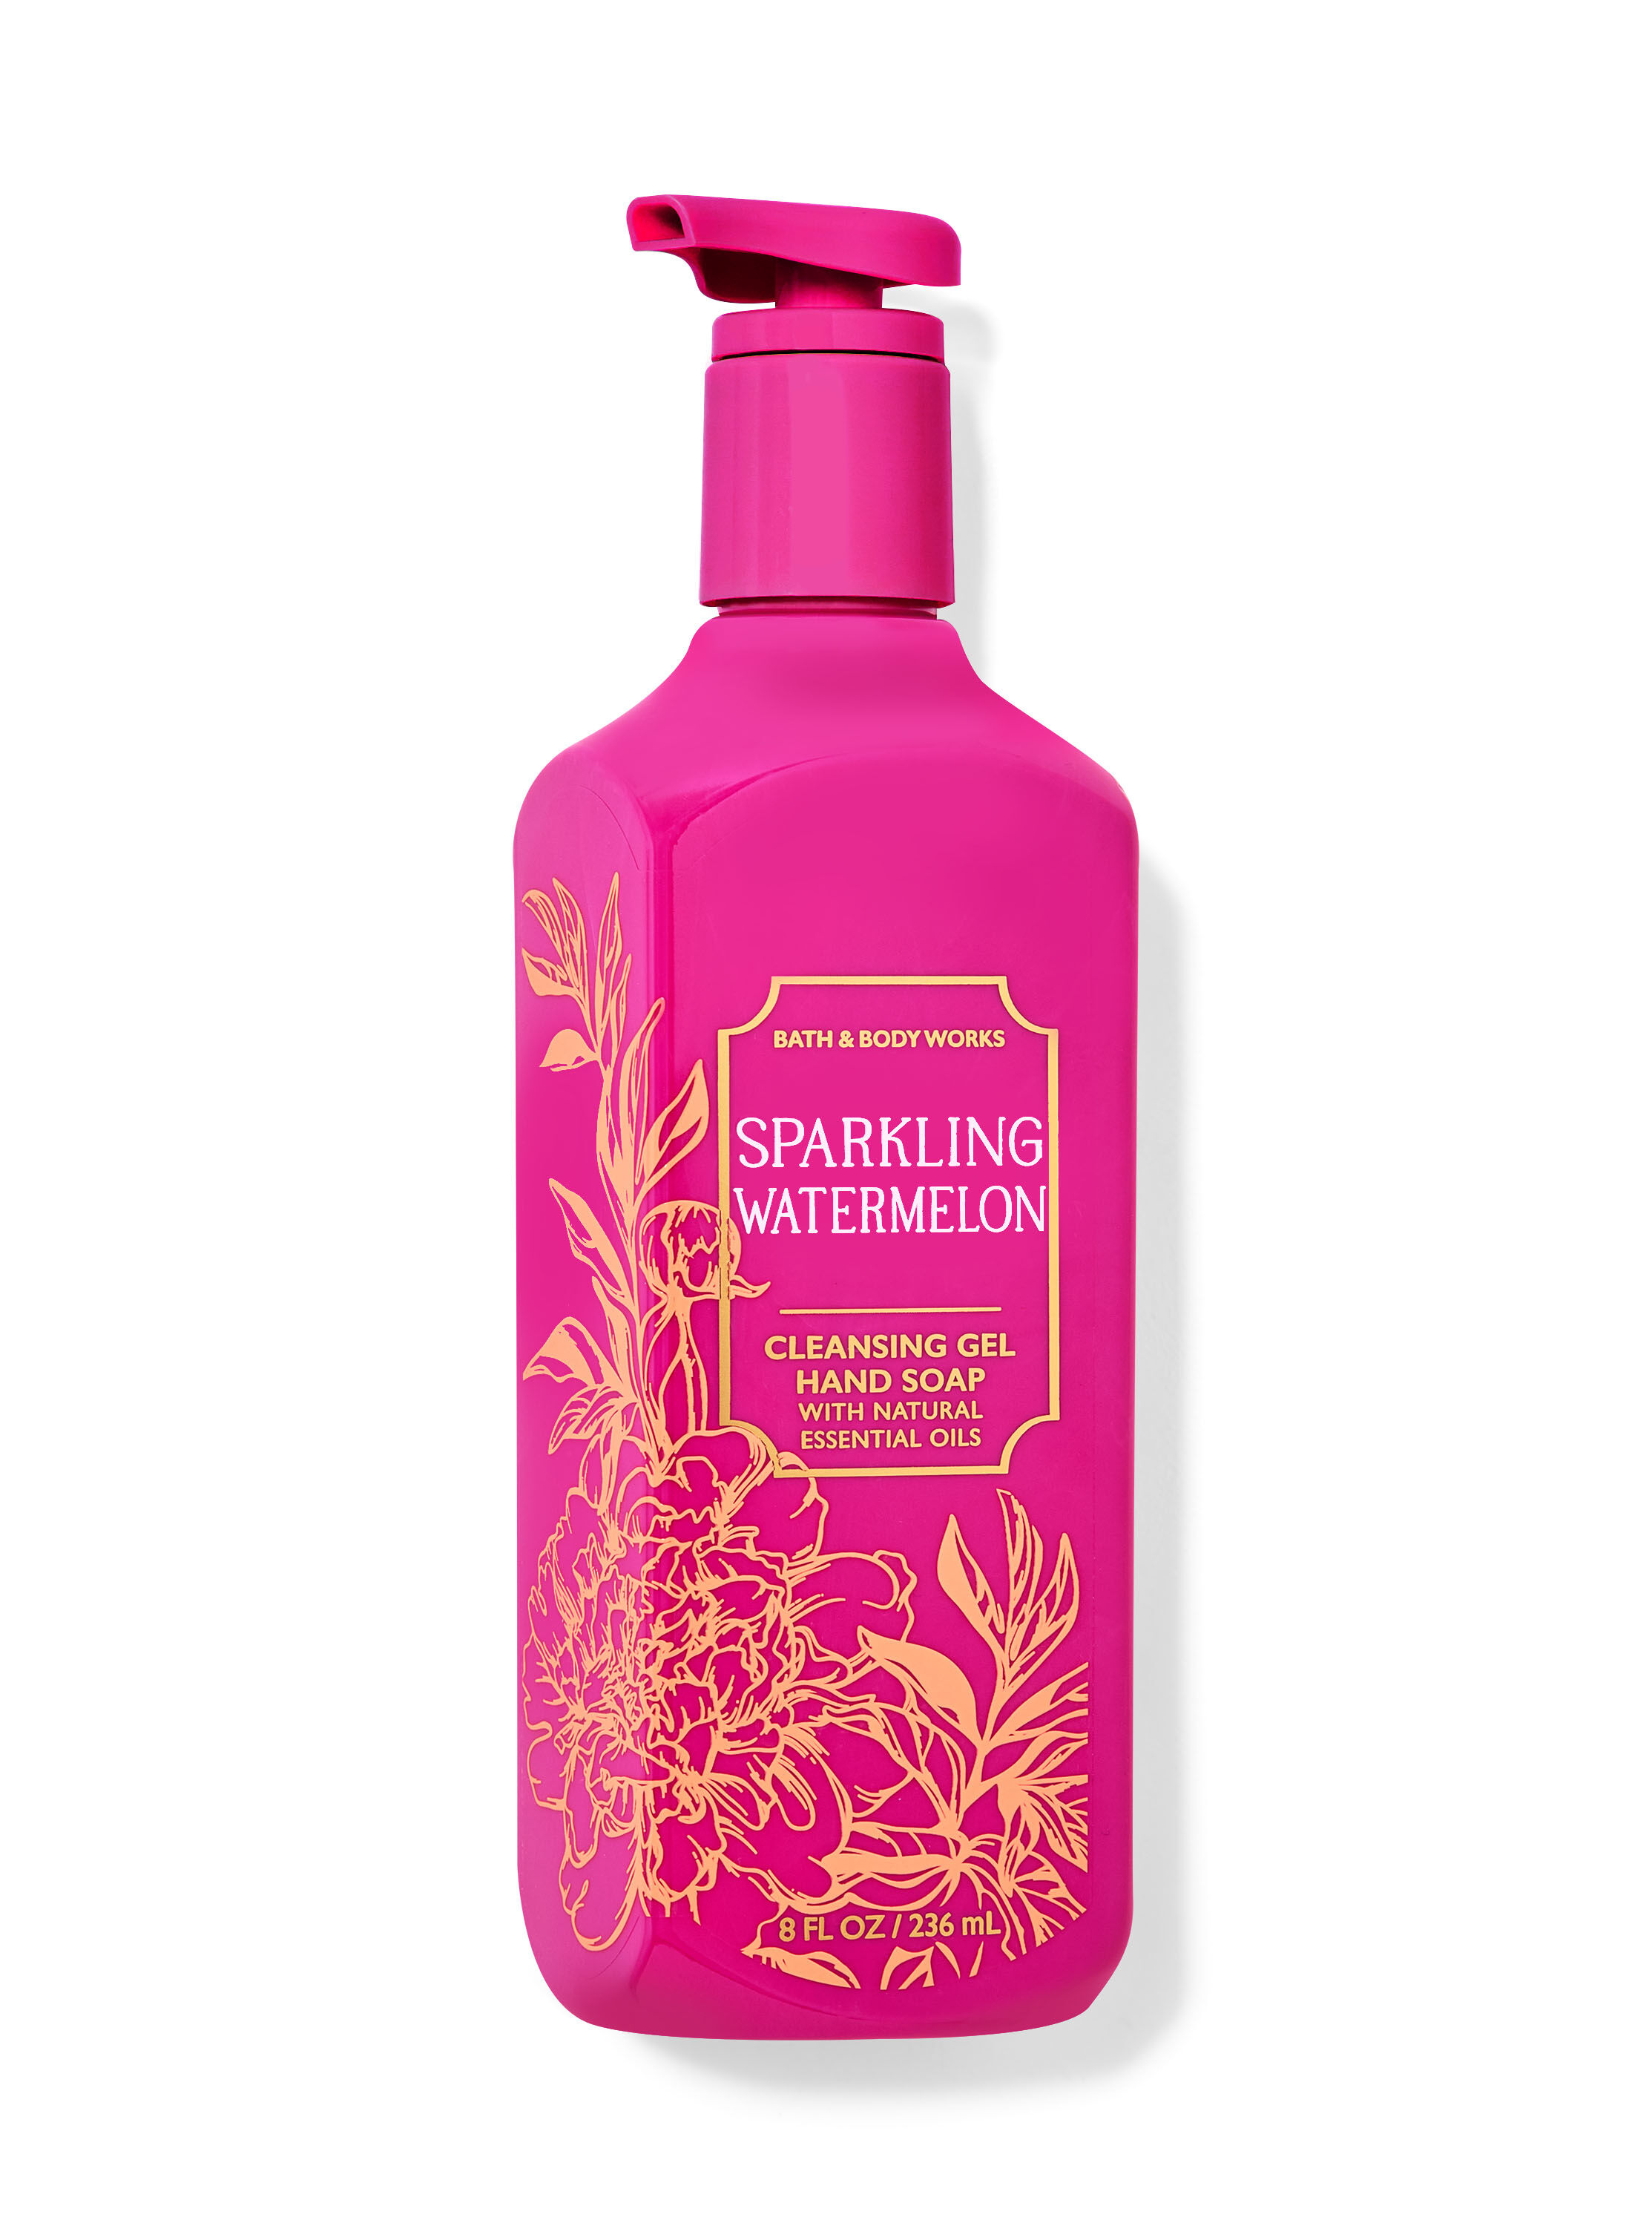 Sparkling Watermelon Cleansing Gel Hand Soap